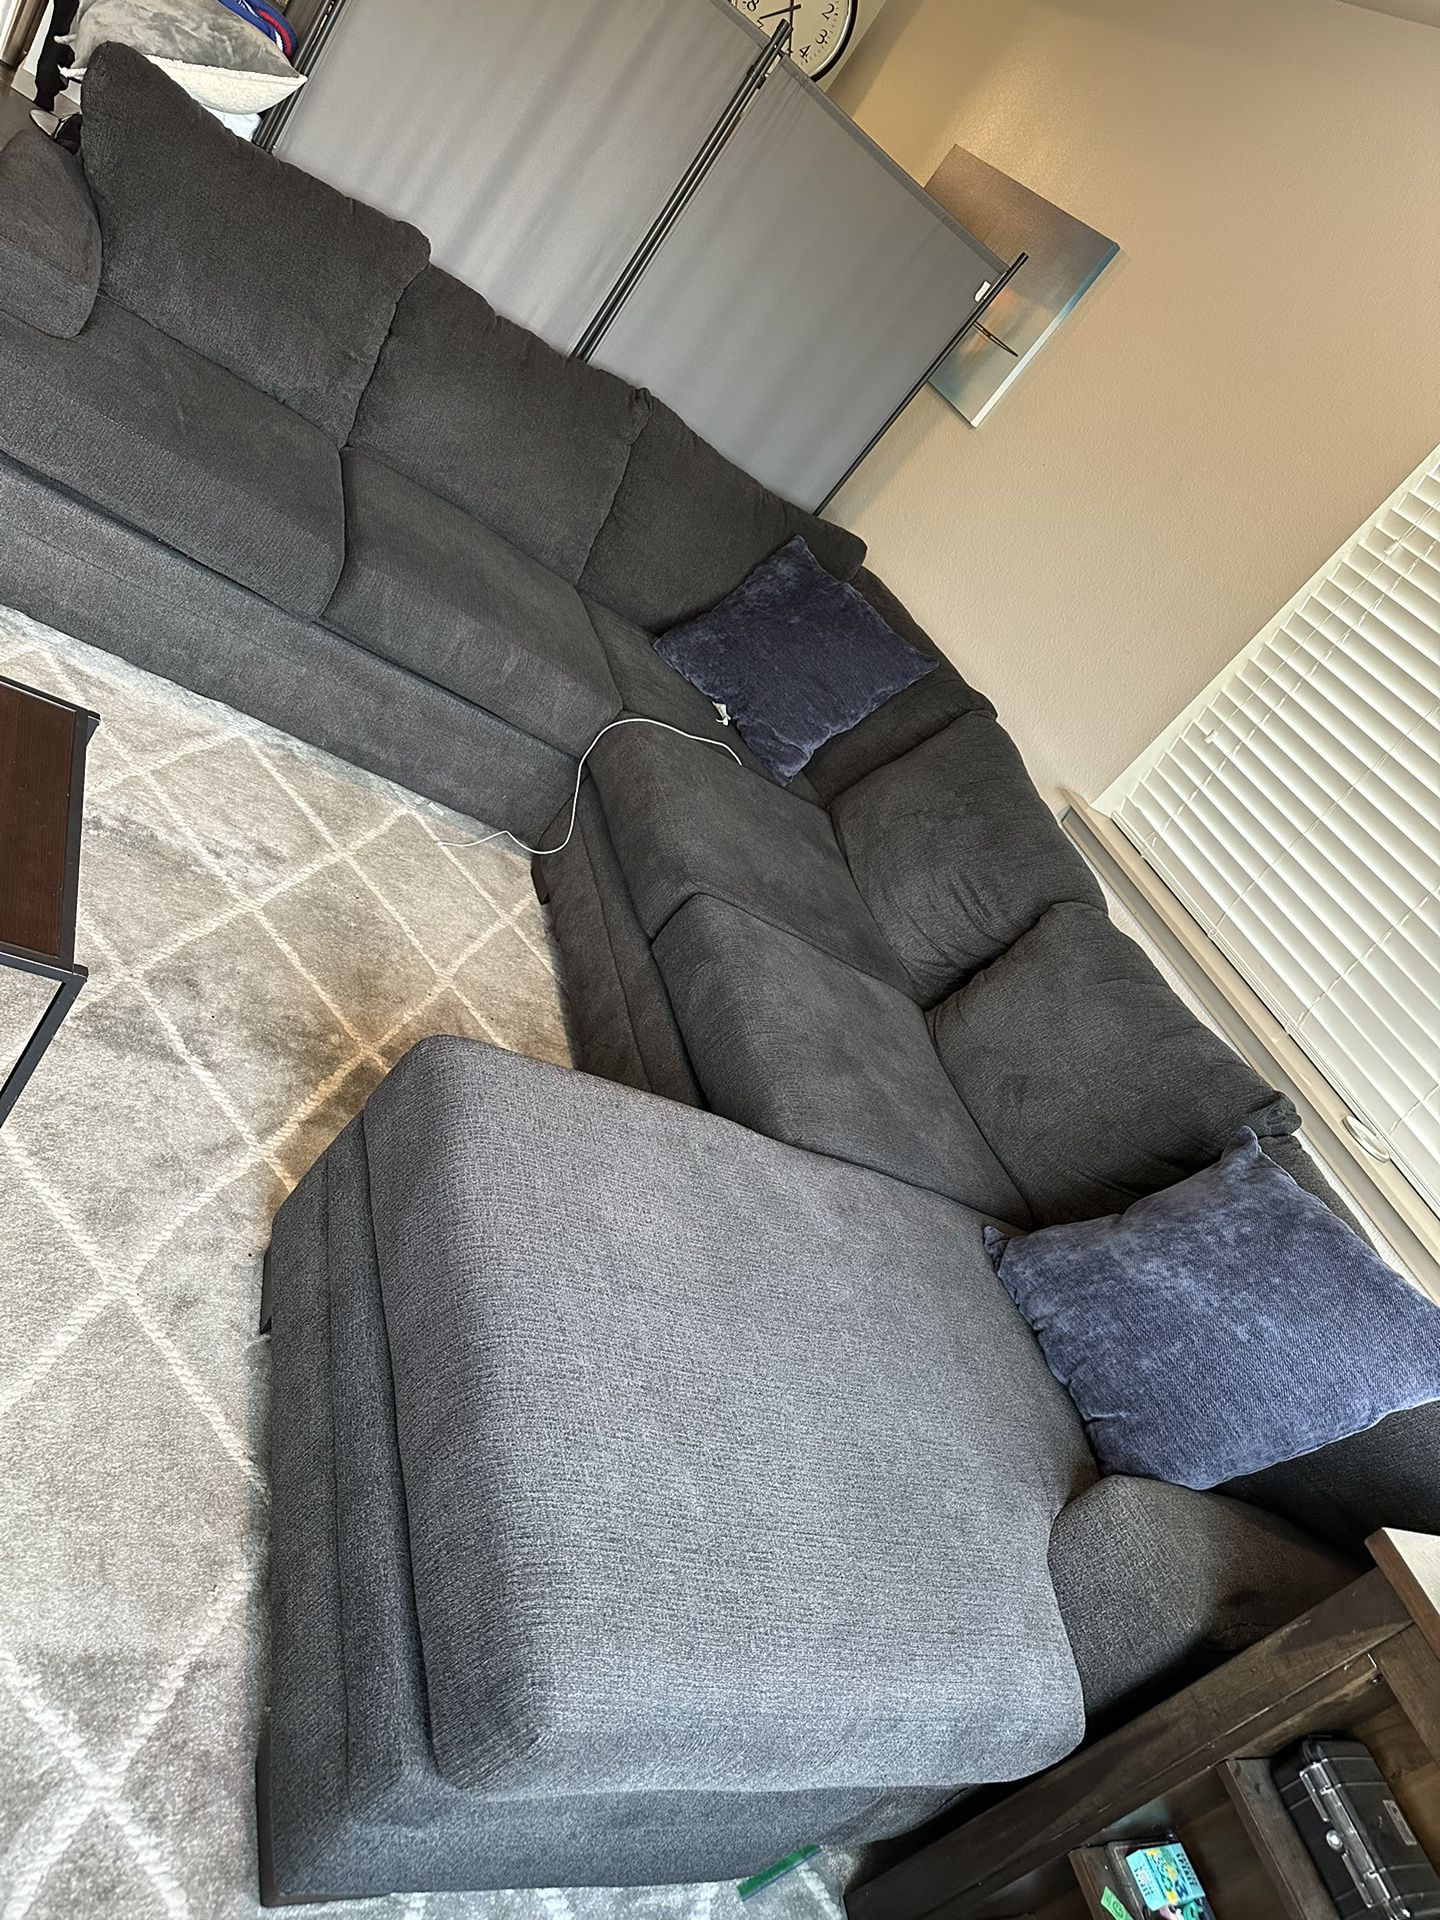 🚚 FREE DELIVERY ! Gorgeous Blue Gray Sectional Couch 